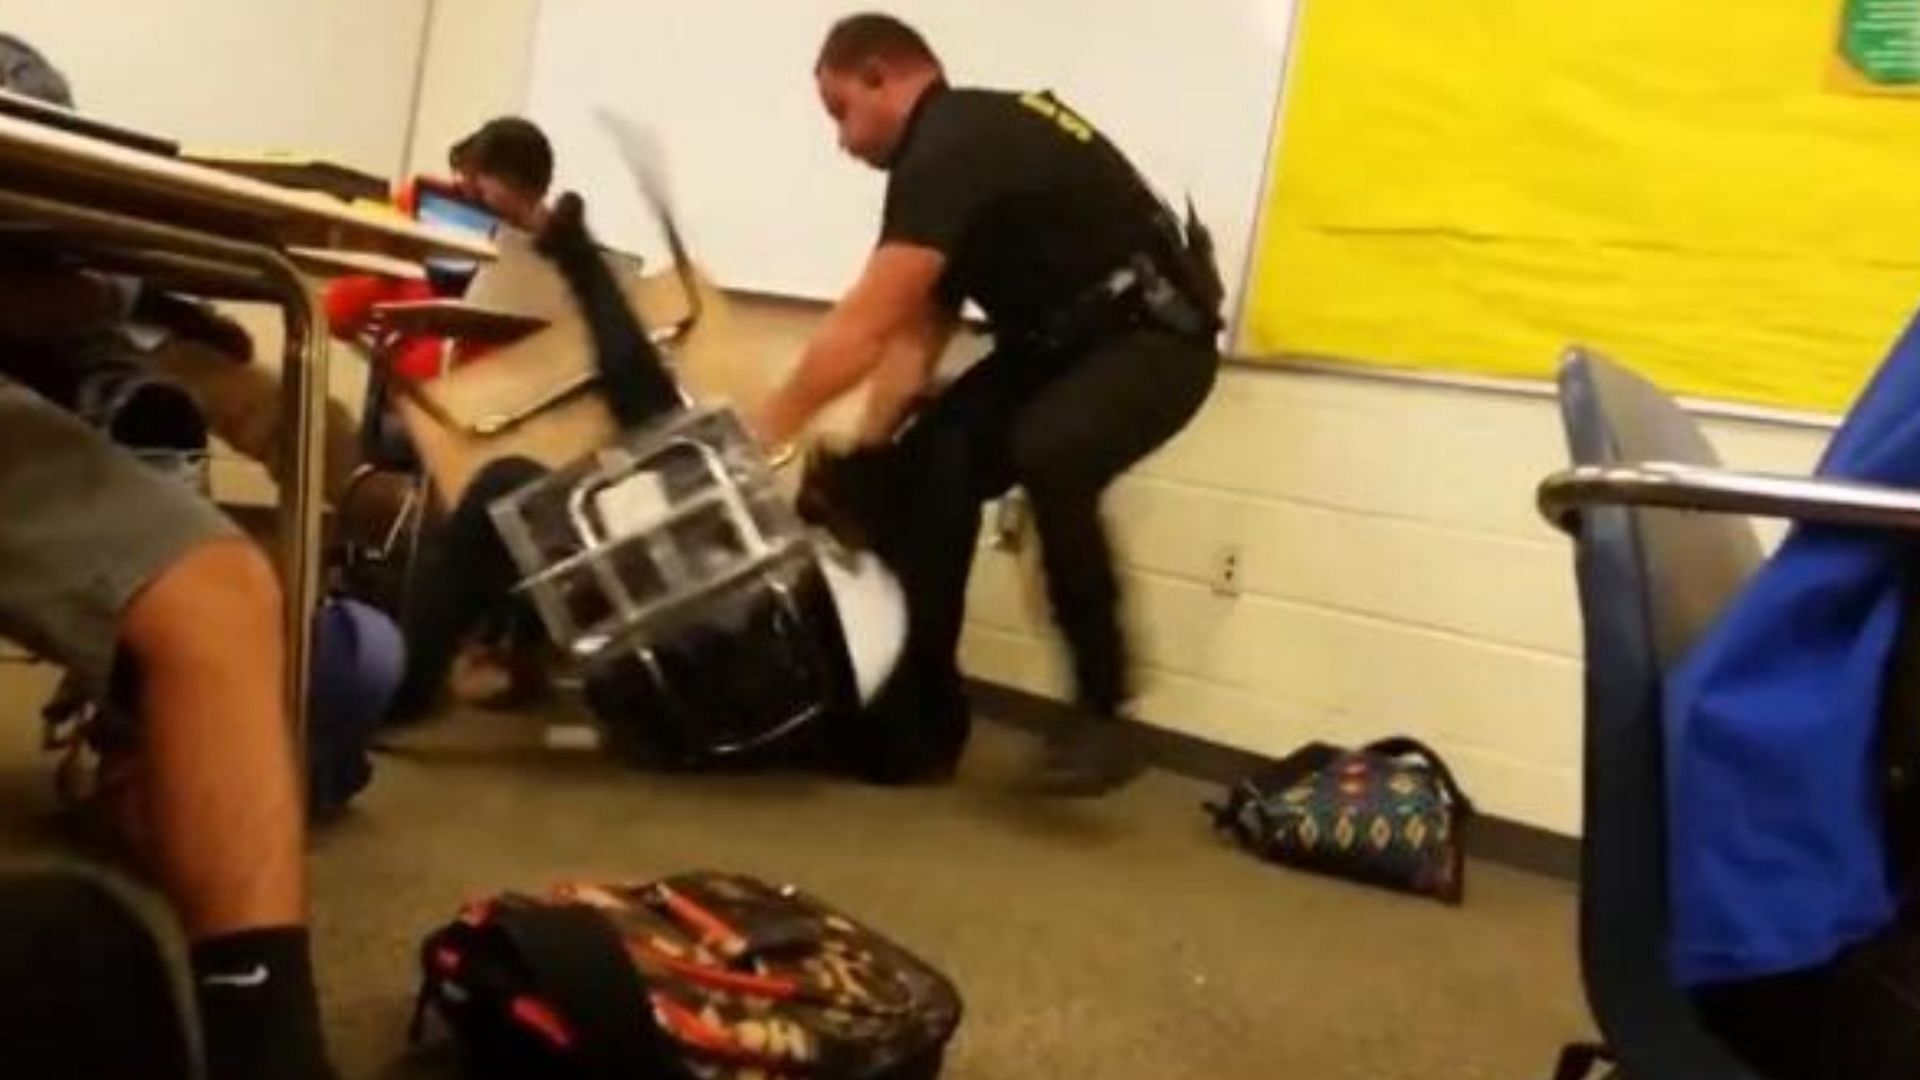 Viral video shows South Carolina cop manhandle a young student (Image via Twitter) 